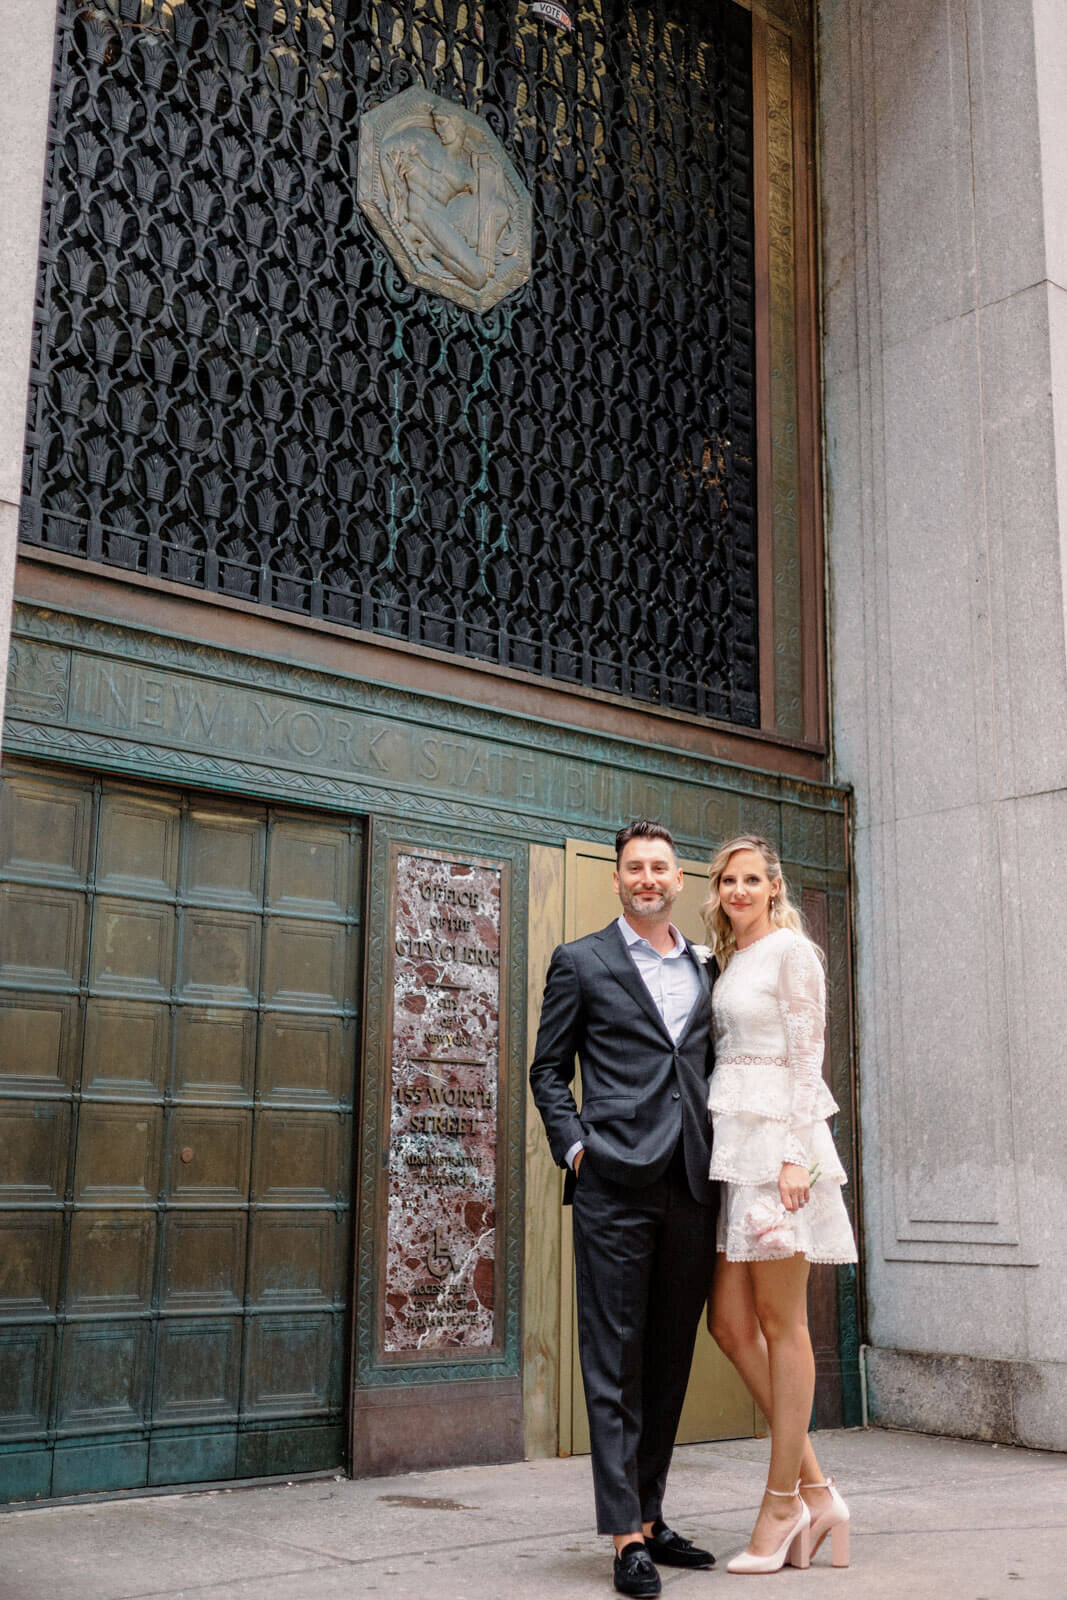 The bride and groom are standing close, smiling, outside the NY City Hall exit door after their elopement. Image by Jenny fu Studio